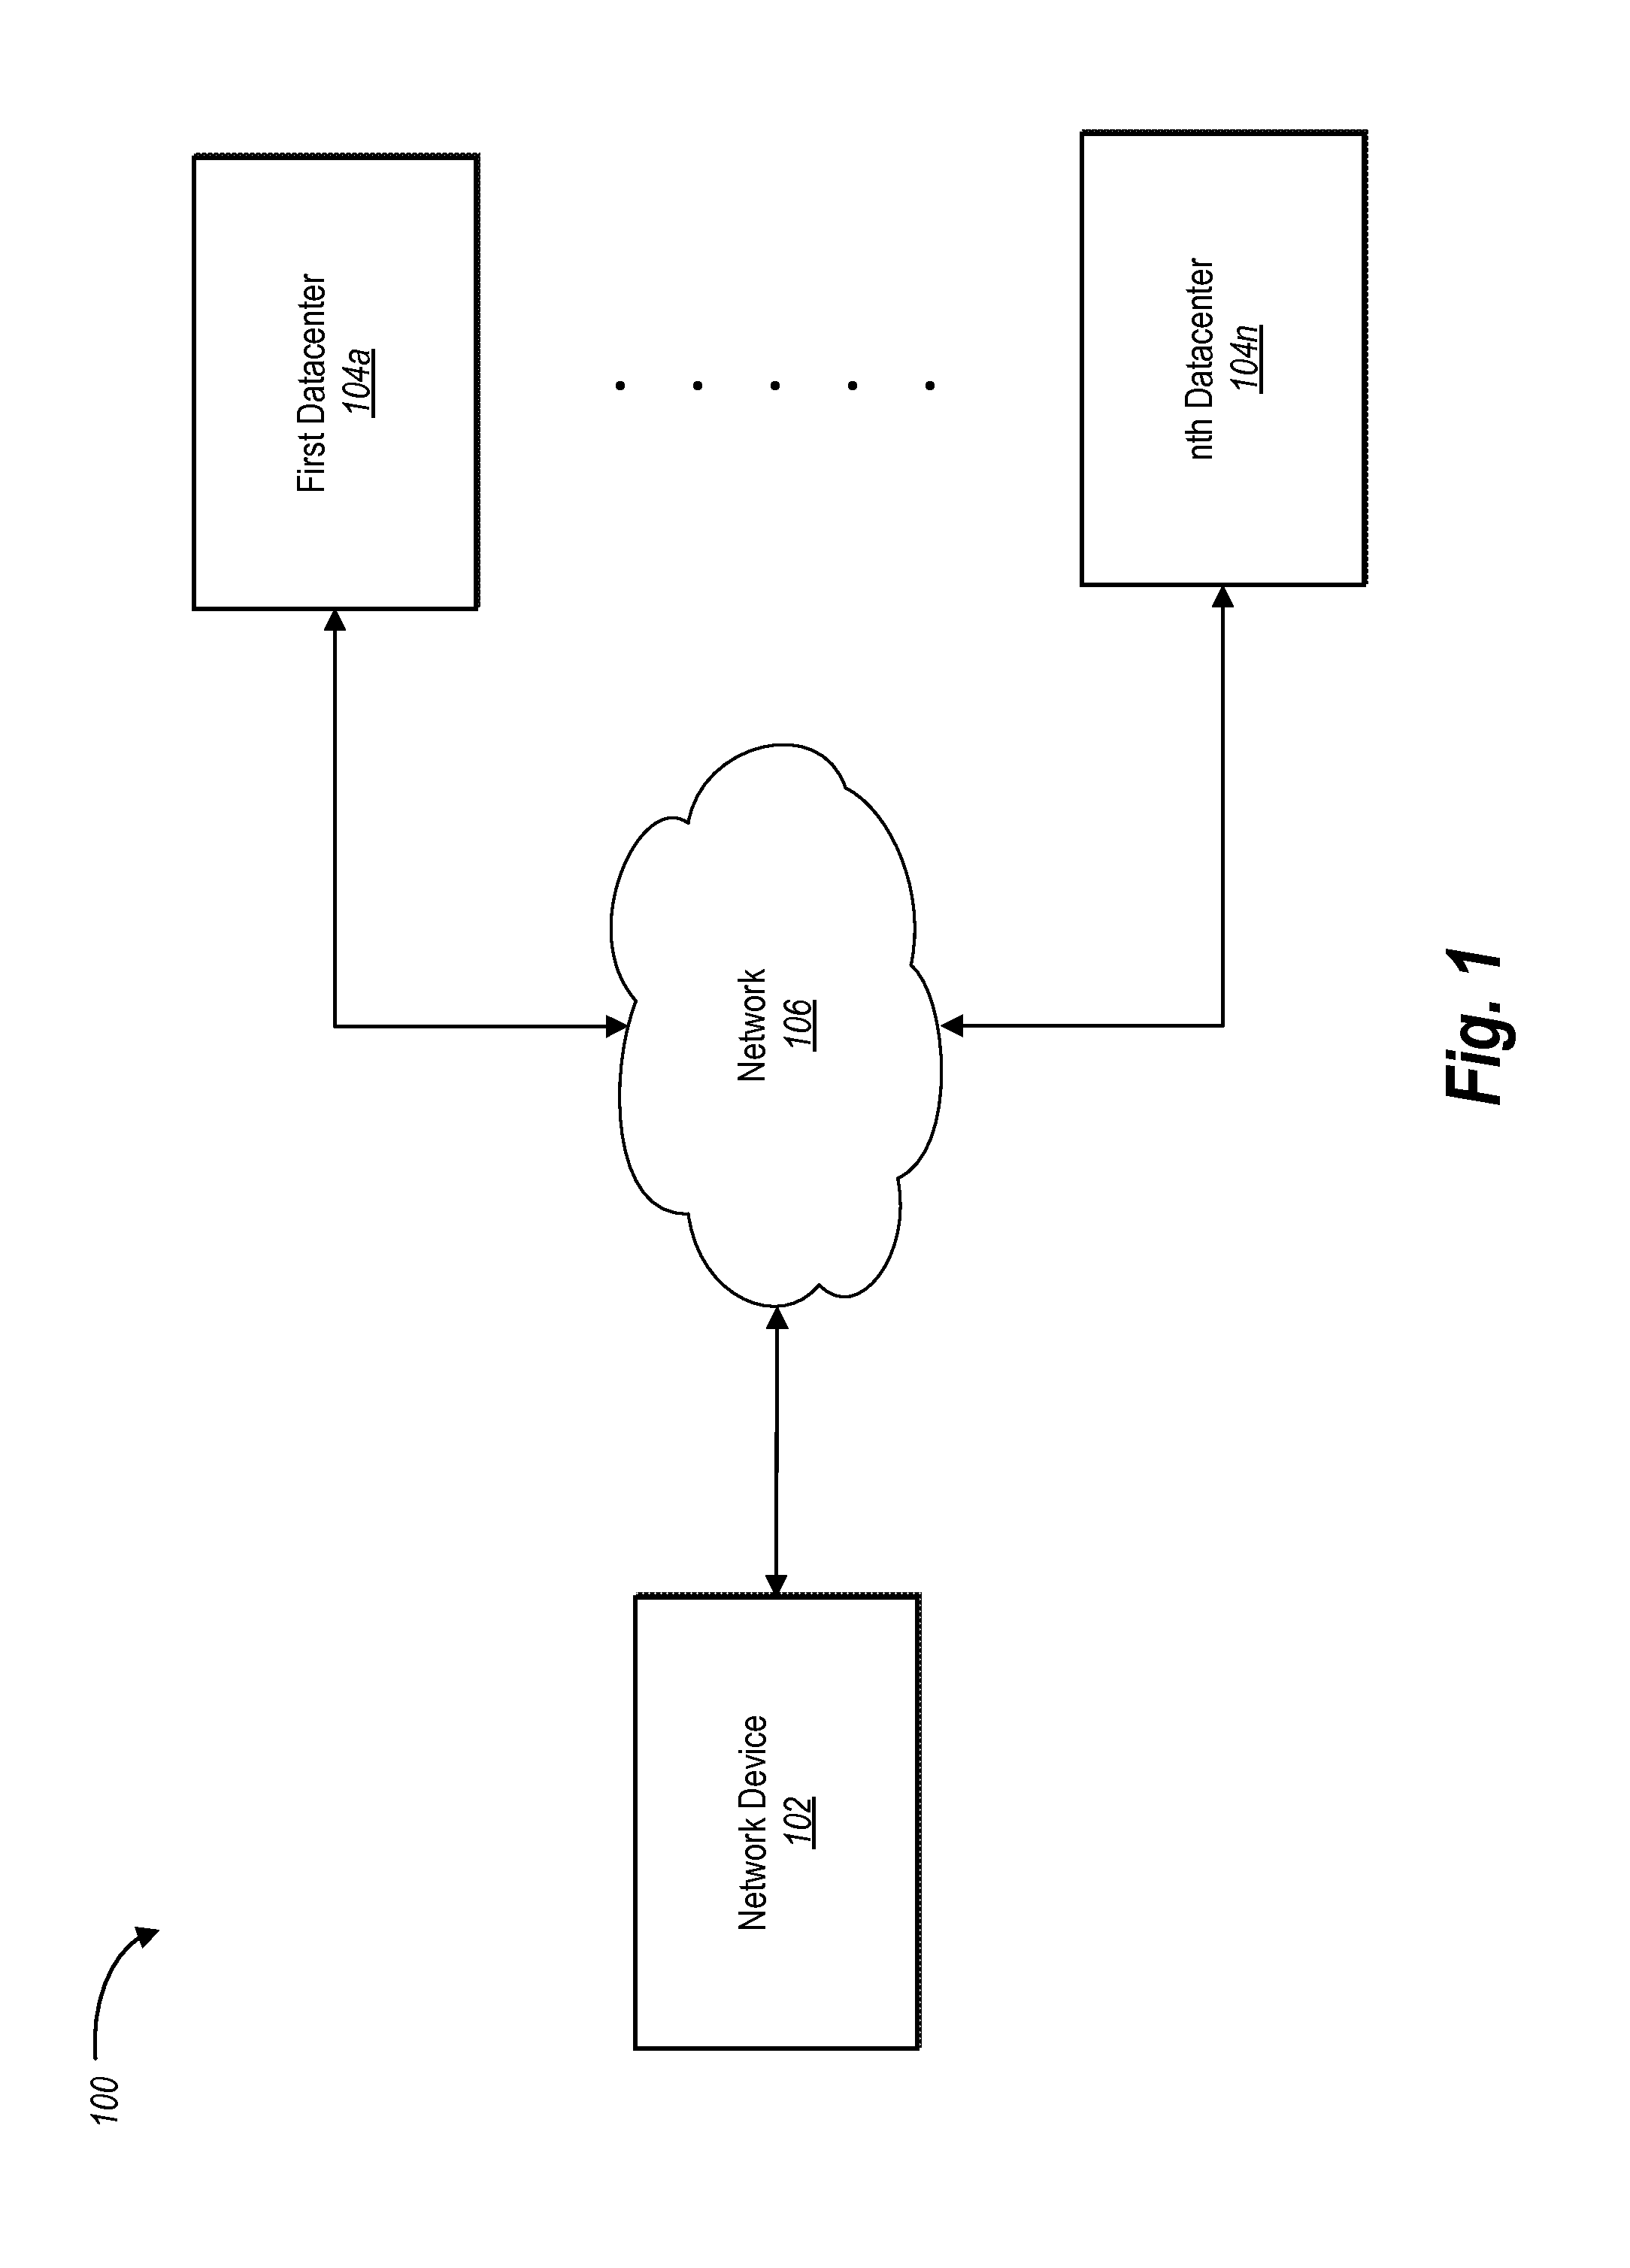 Datacenter event stream processing in a network-based communication system